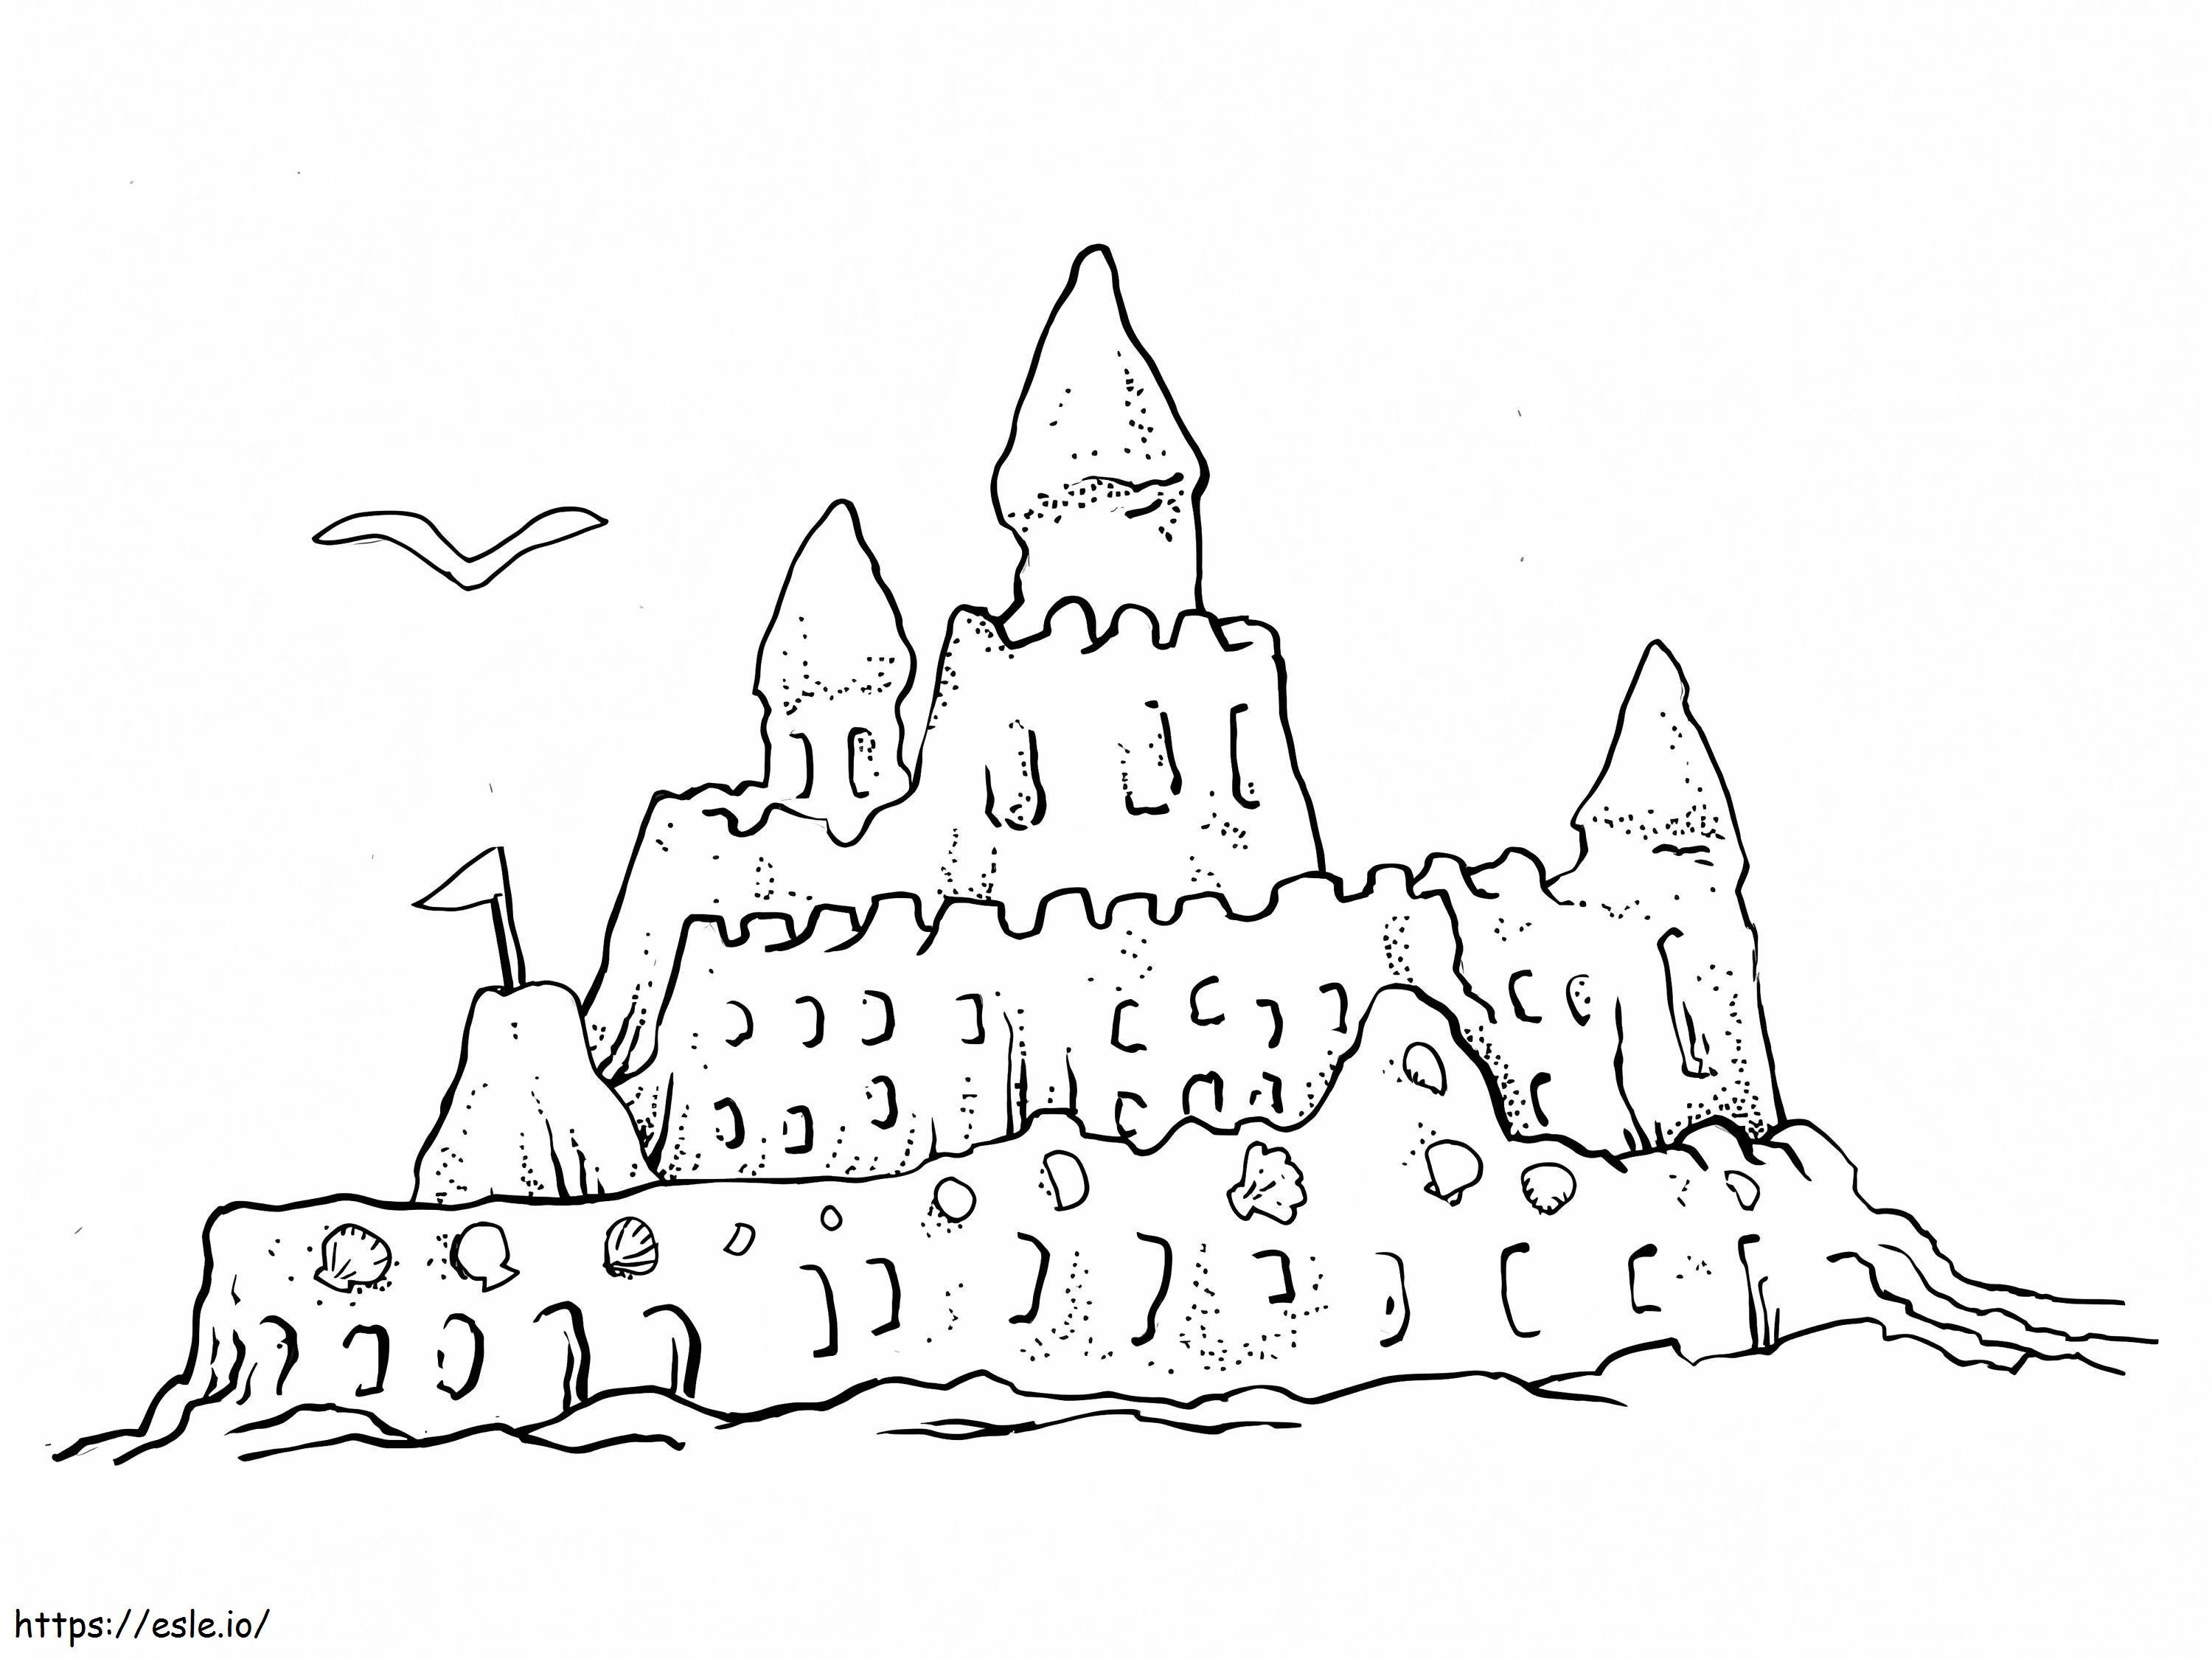 Cool Sand Castle coloring page